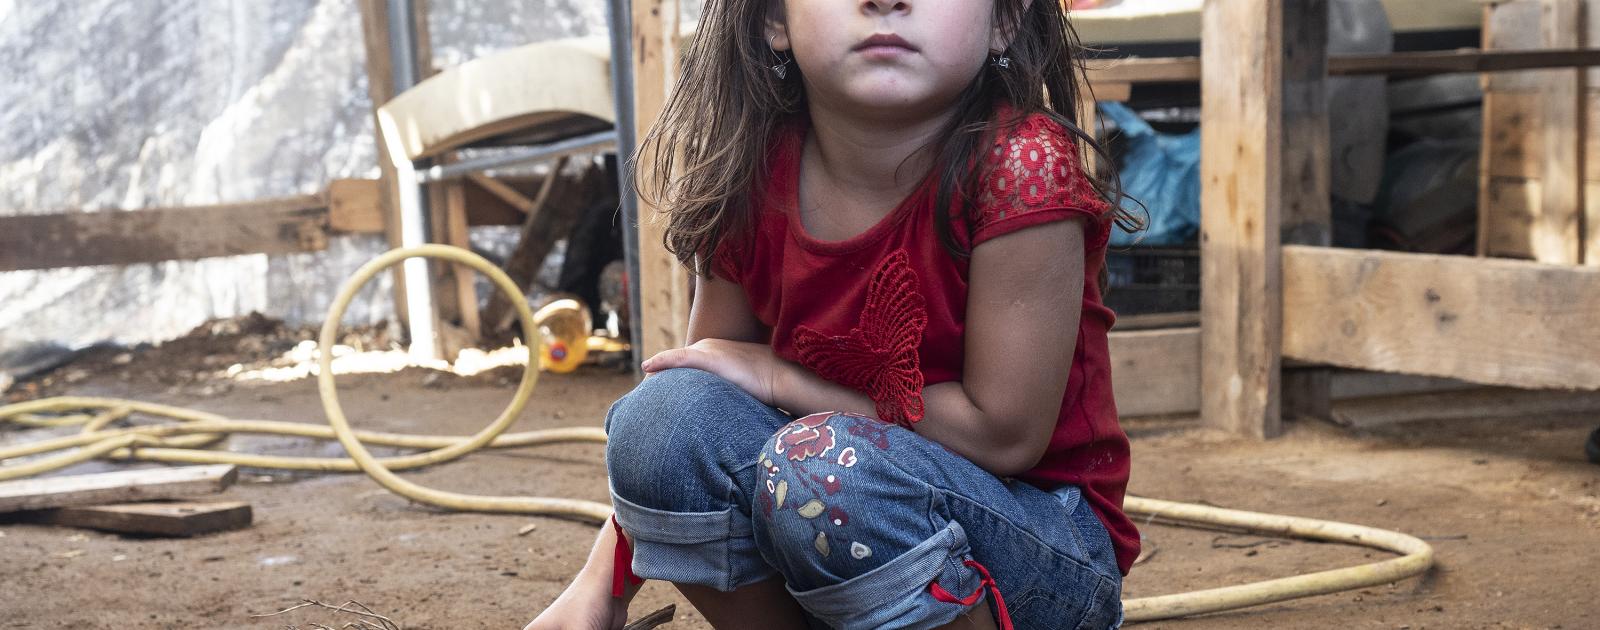 Girl in a refugee camp in Greece